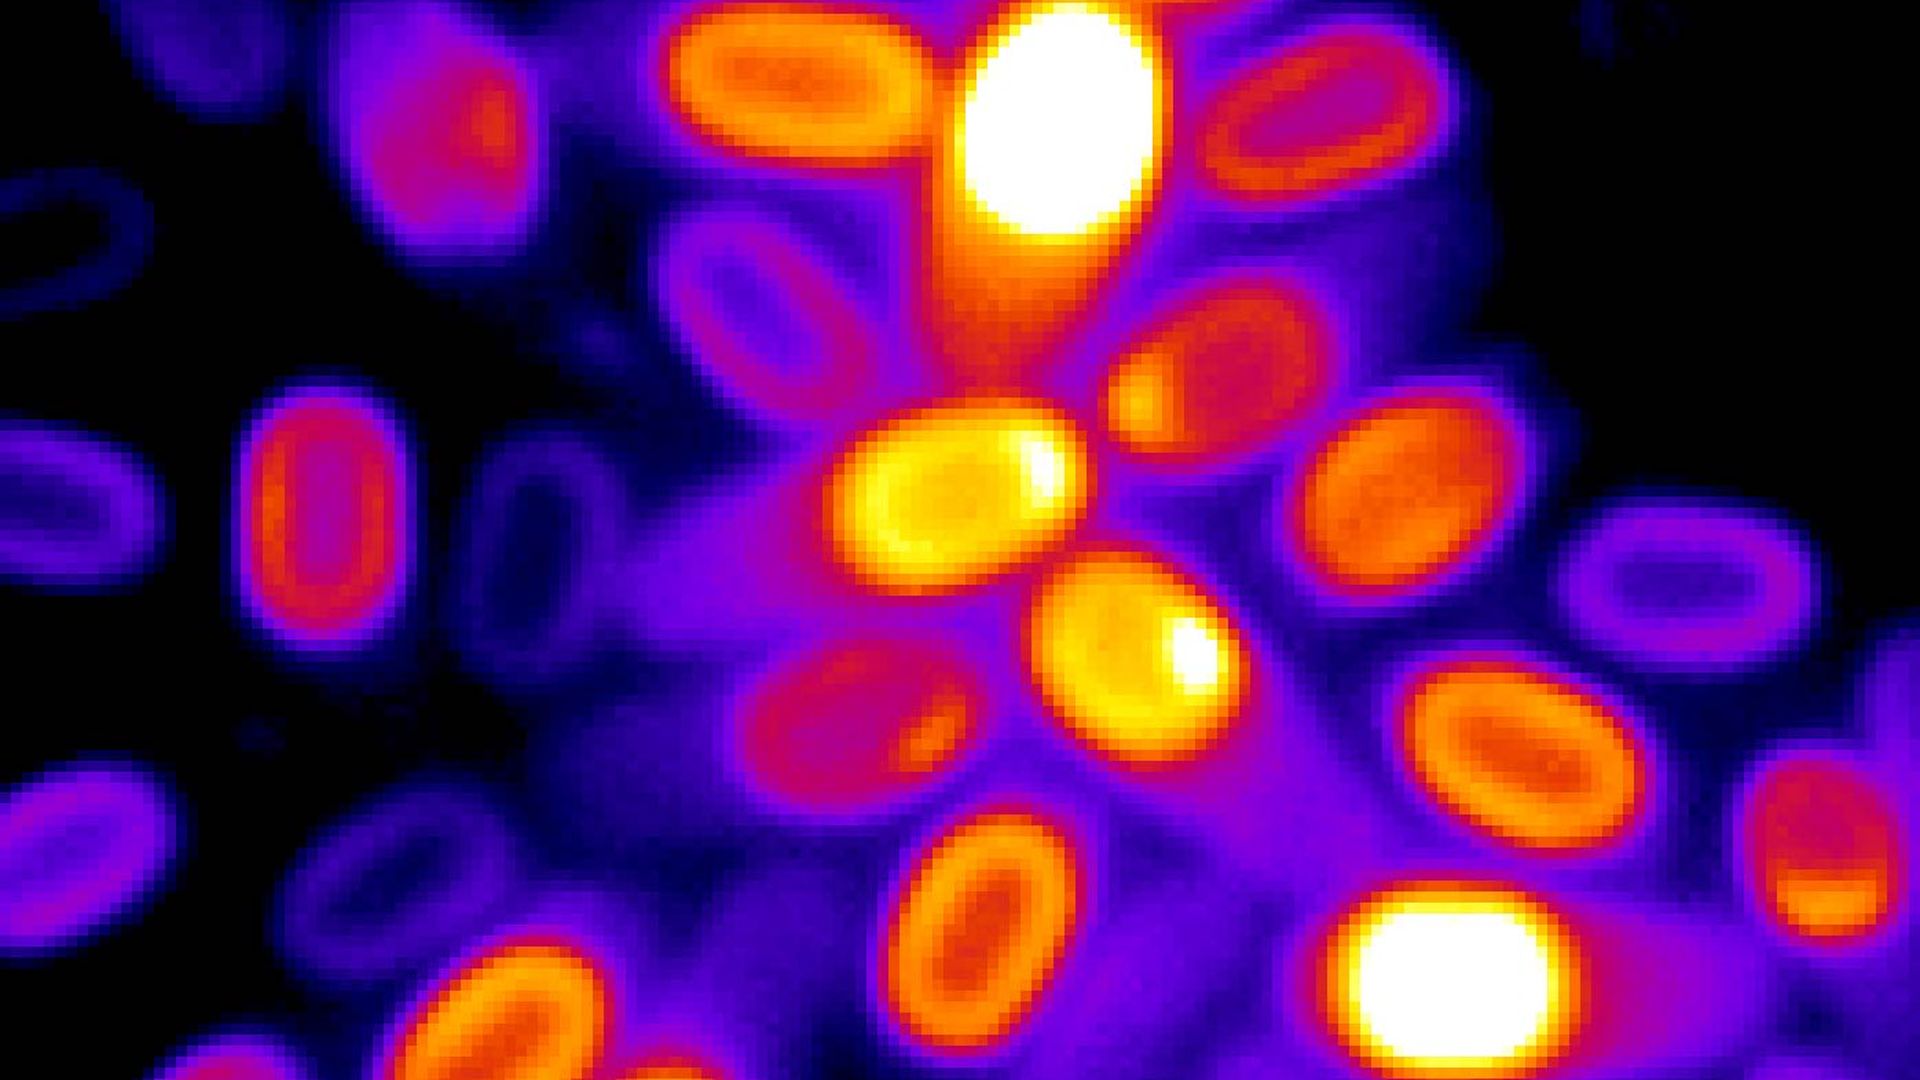 Microscopy image of several spores with their electrochemical potential color coded according to value. Image: Suel Lab – Kaito Kikuchi and Leticia Galera